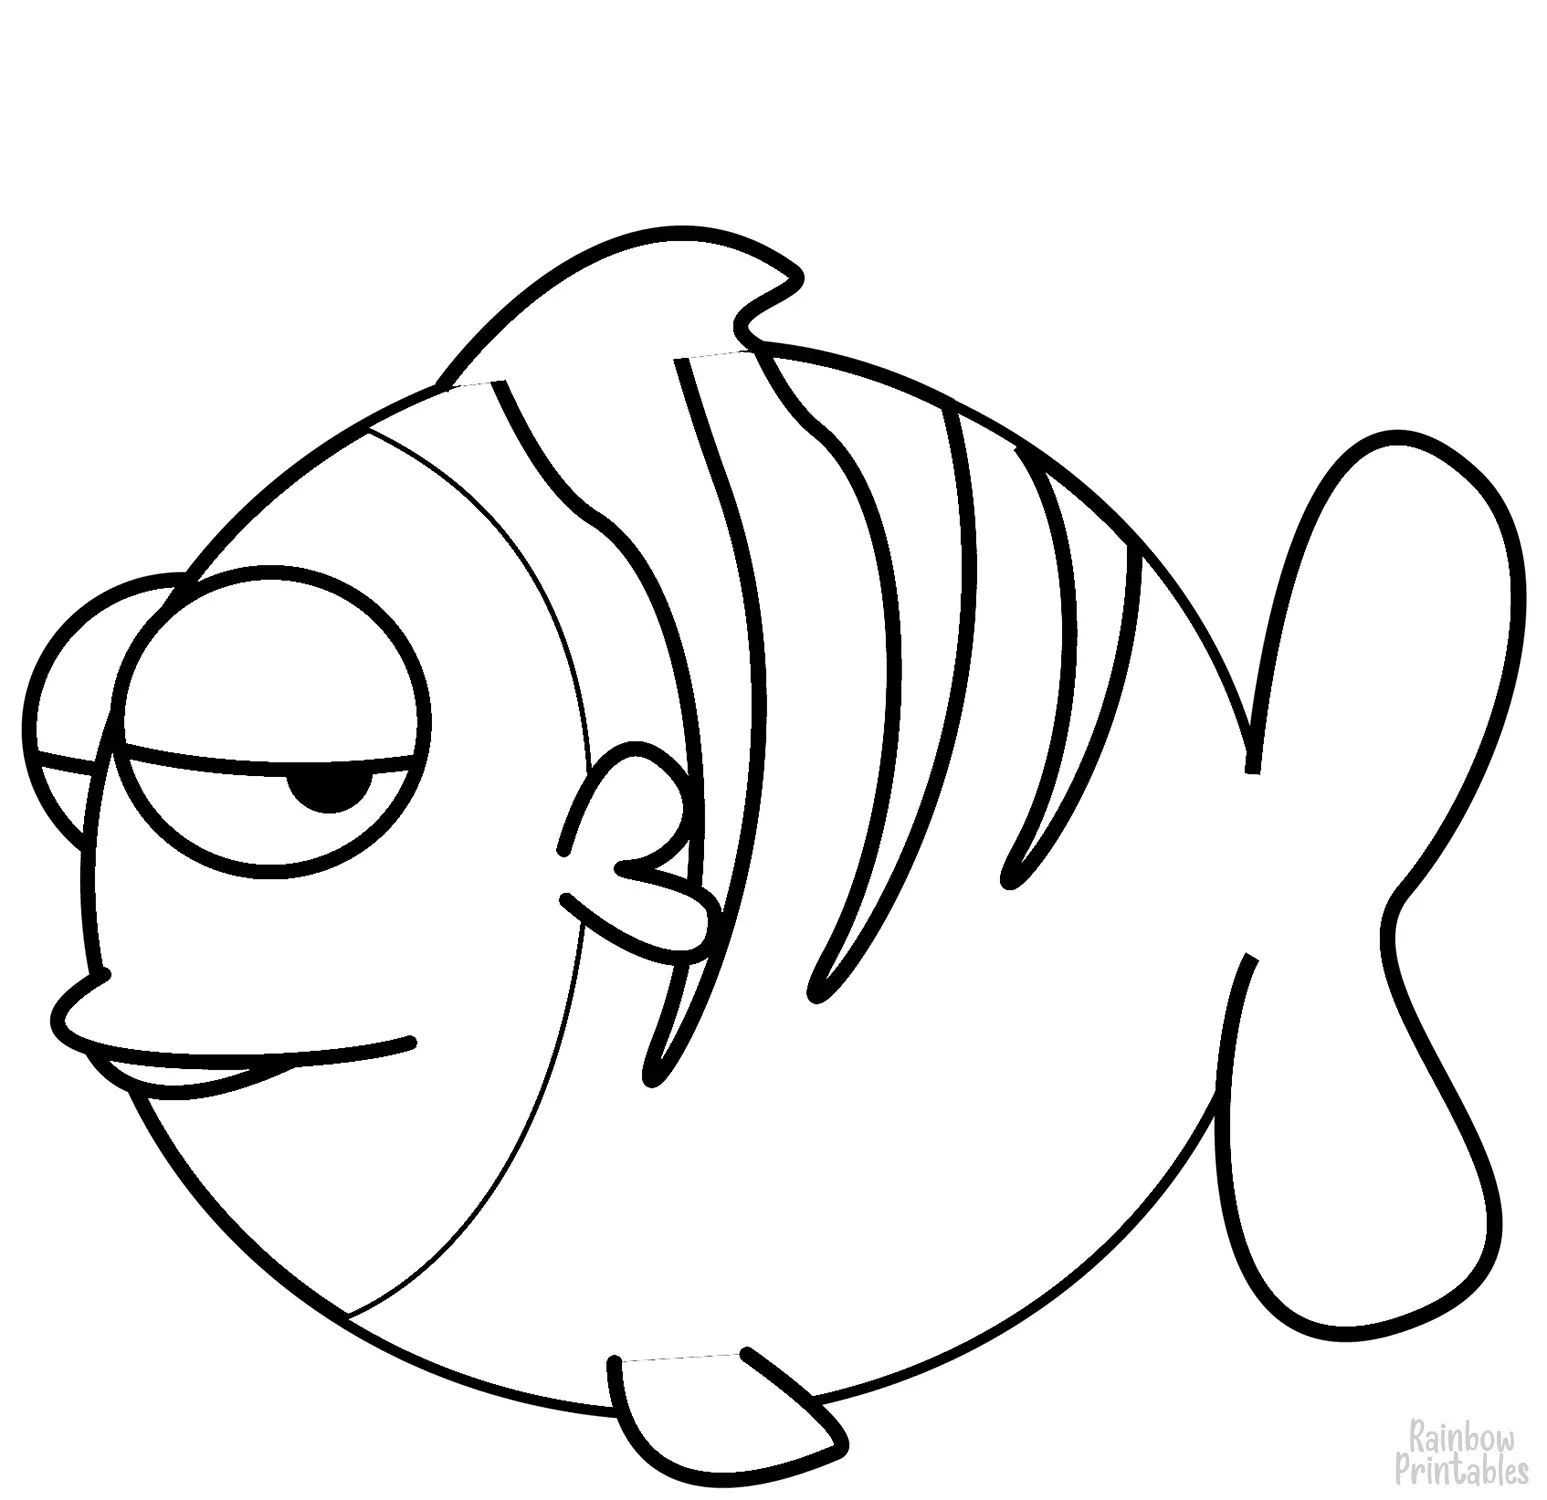 SIMPLE-EASY-line-drawings-FISH-cartoon-coloring-page-for-kids